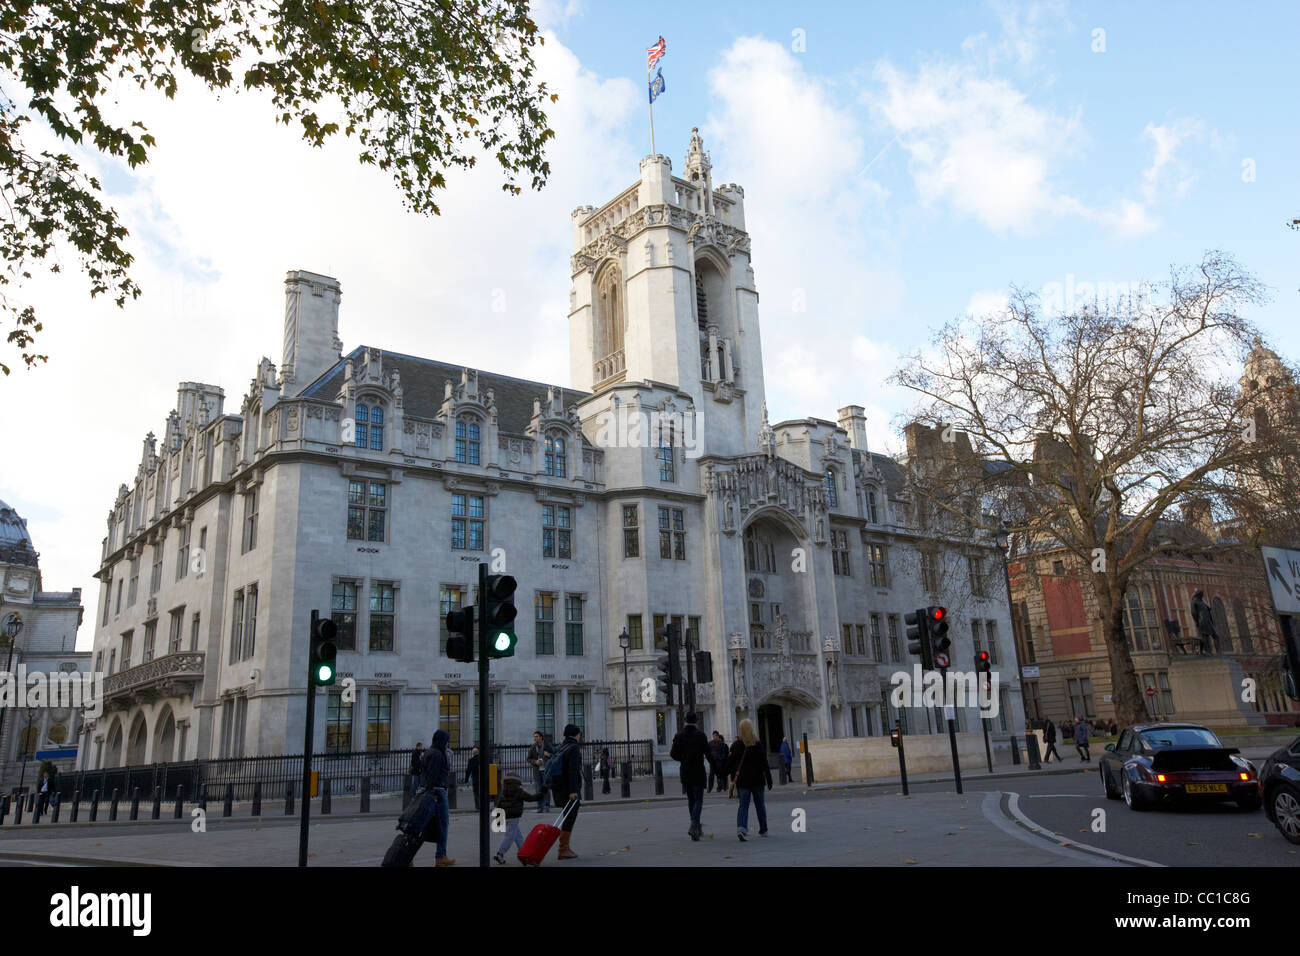 middlesex guildhall home to the supreme court of the united kingdom London England UK United kingdom Stock Photo